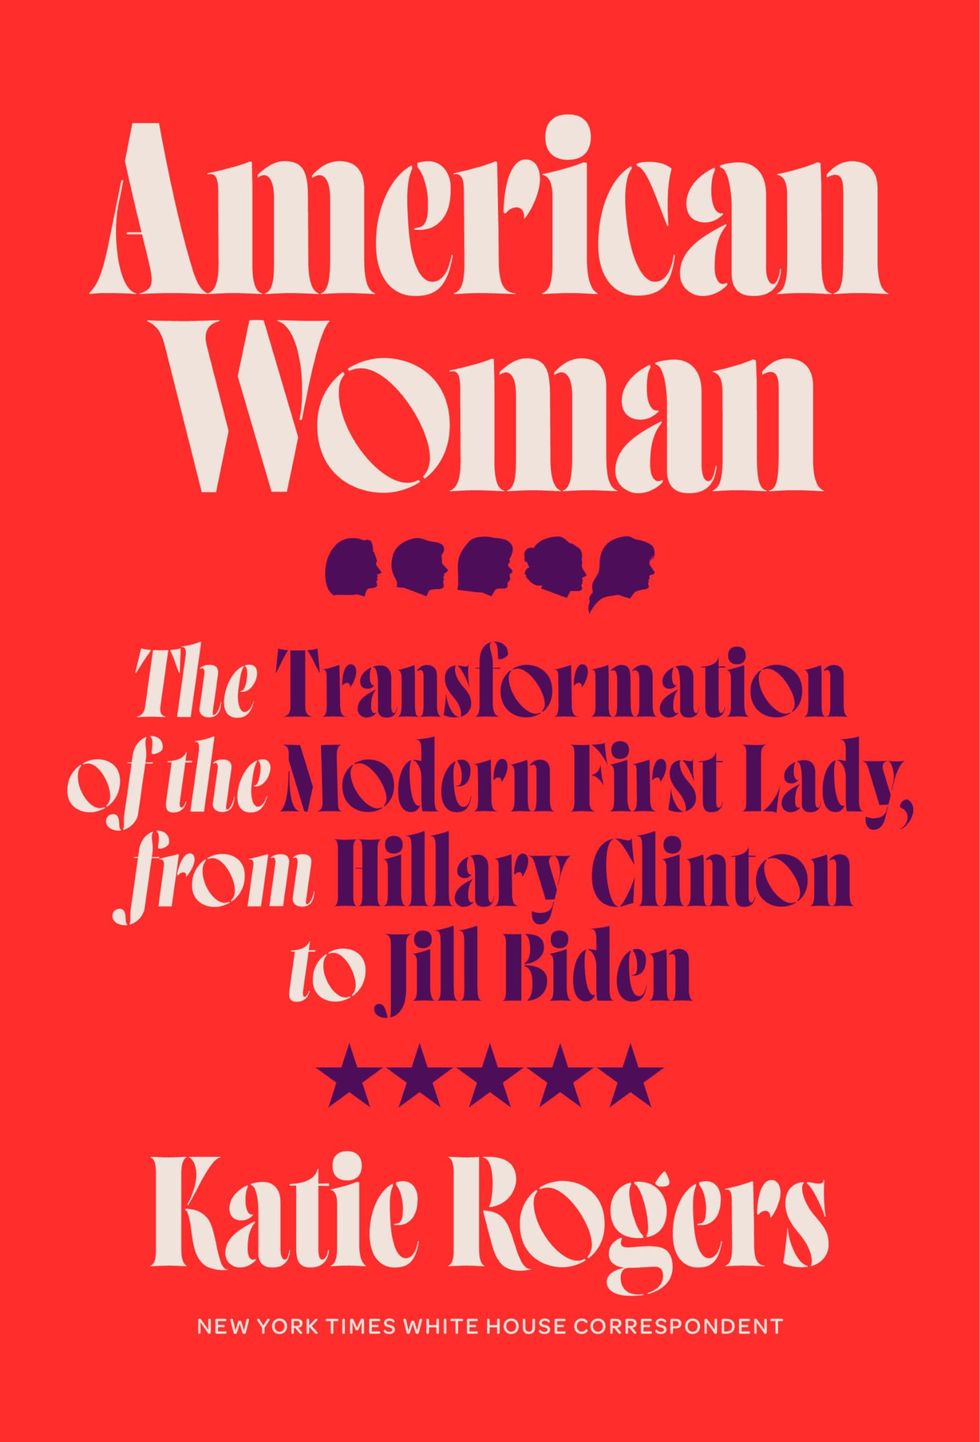 Katie Rogers on Her Book 'American Woman' and the Making of the